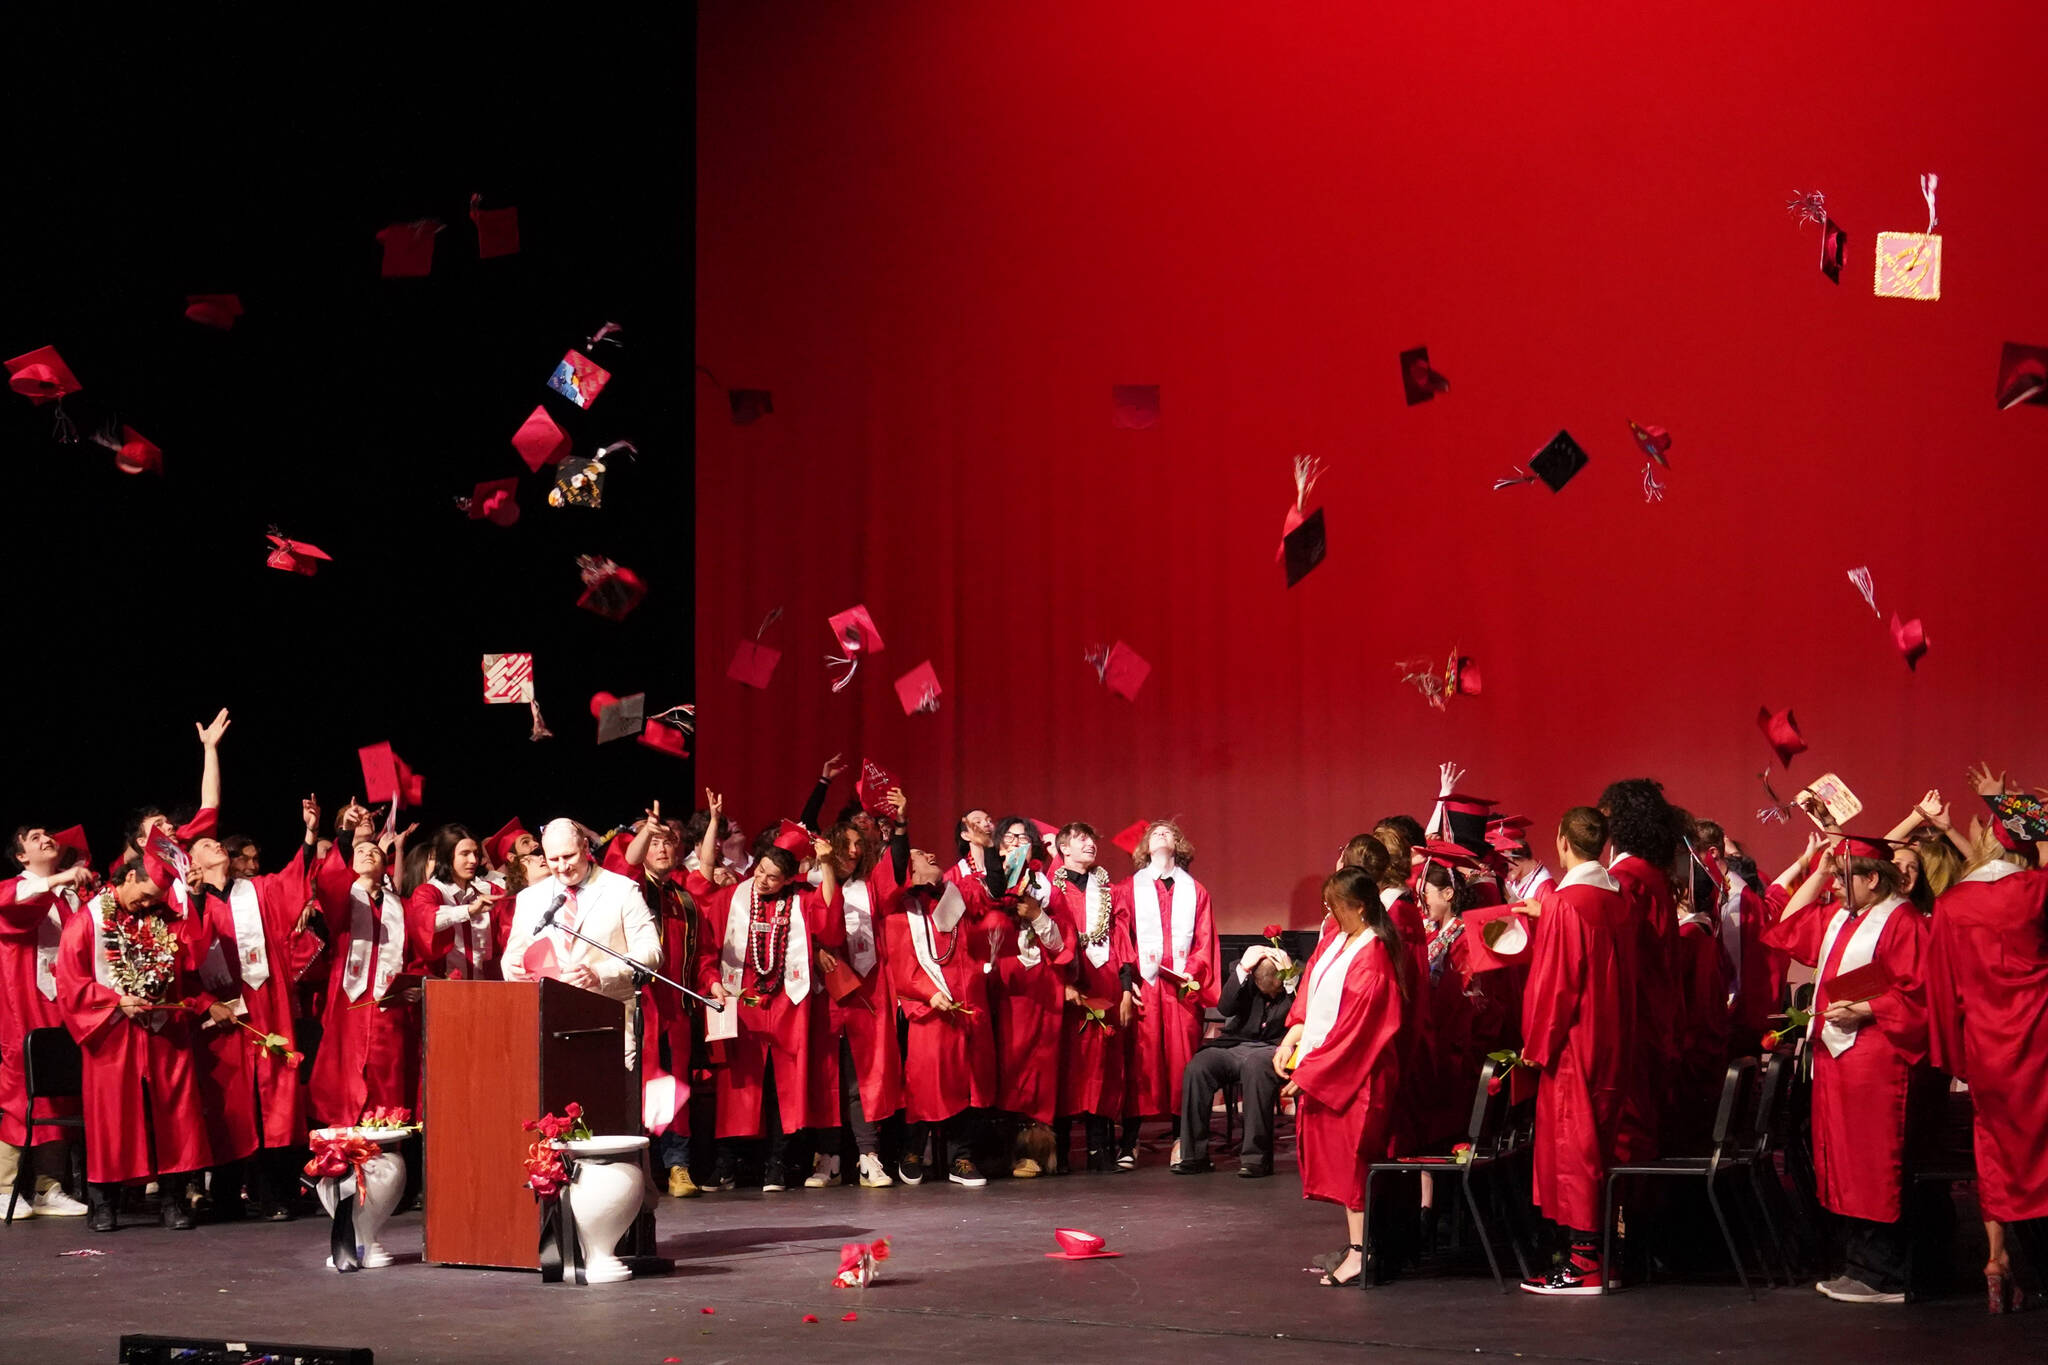 Kenai Central High School graduates celebrate after their graduation ceremony on Wednesday, May 17, 2023, at Kenai Central High School in Kenai, Alaska. (Jake Dye/Peninsula Clarion)